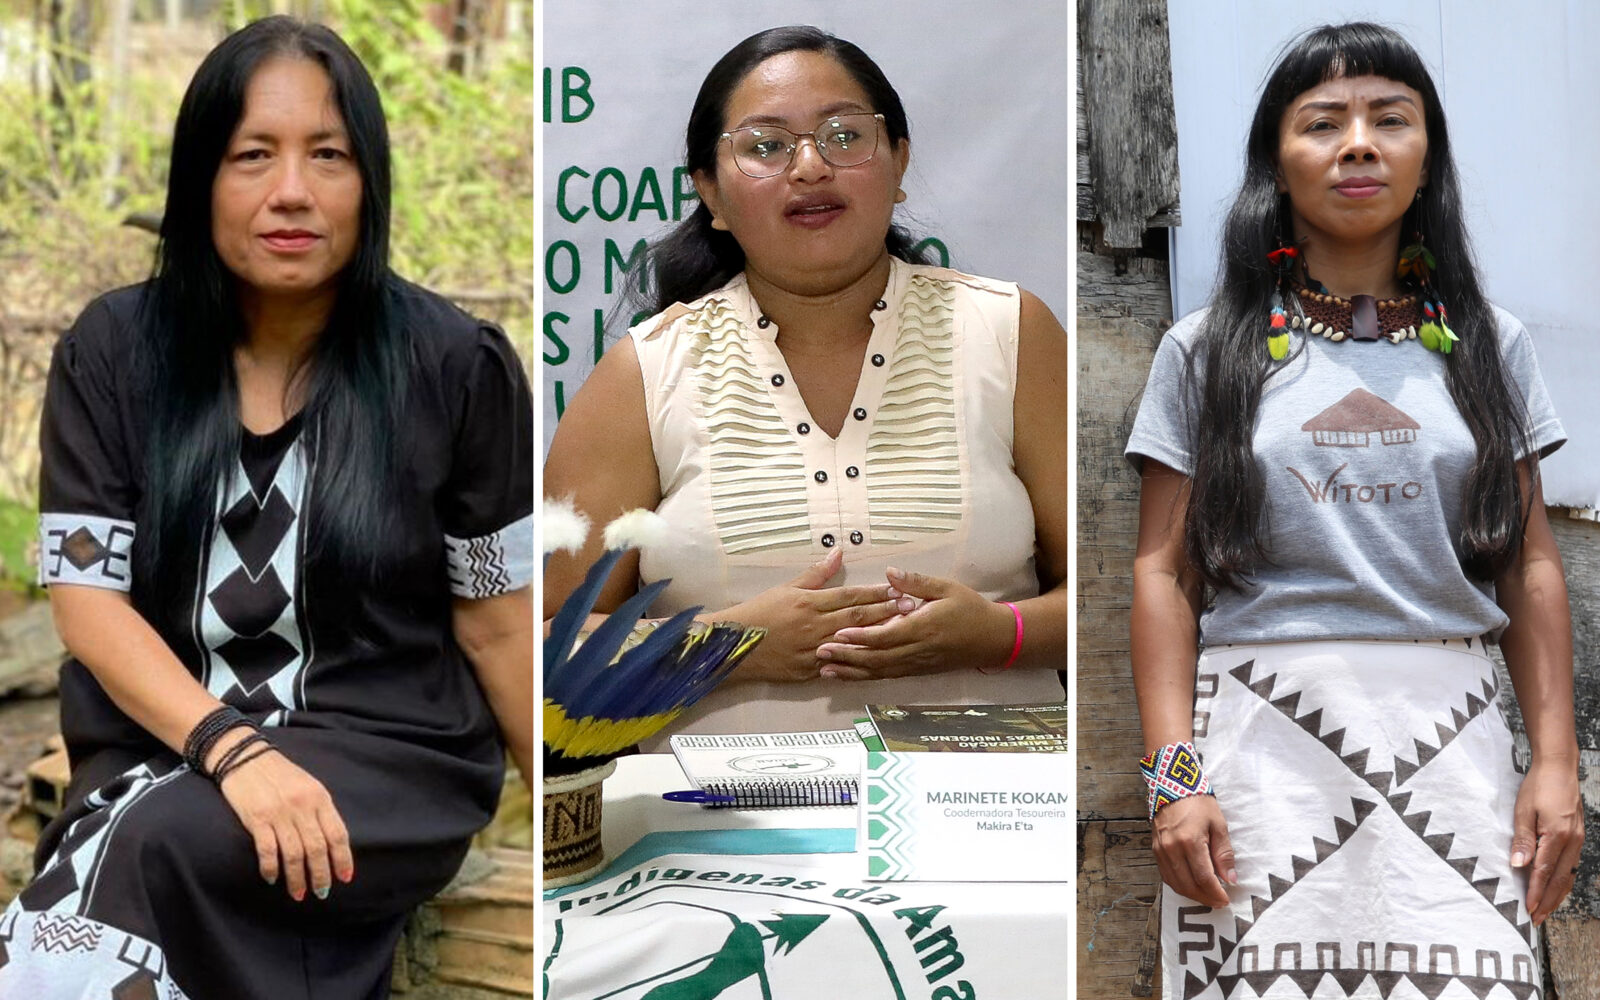 Meet 3 Women in Brazil Who Are Protecting the Amazon Rainforest — and Indigenous Rights pic